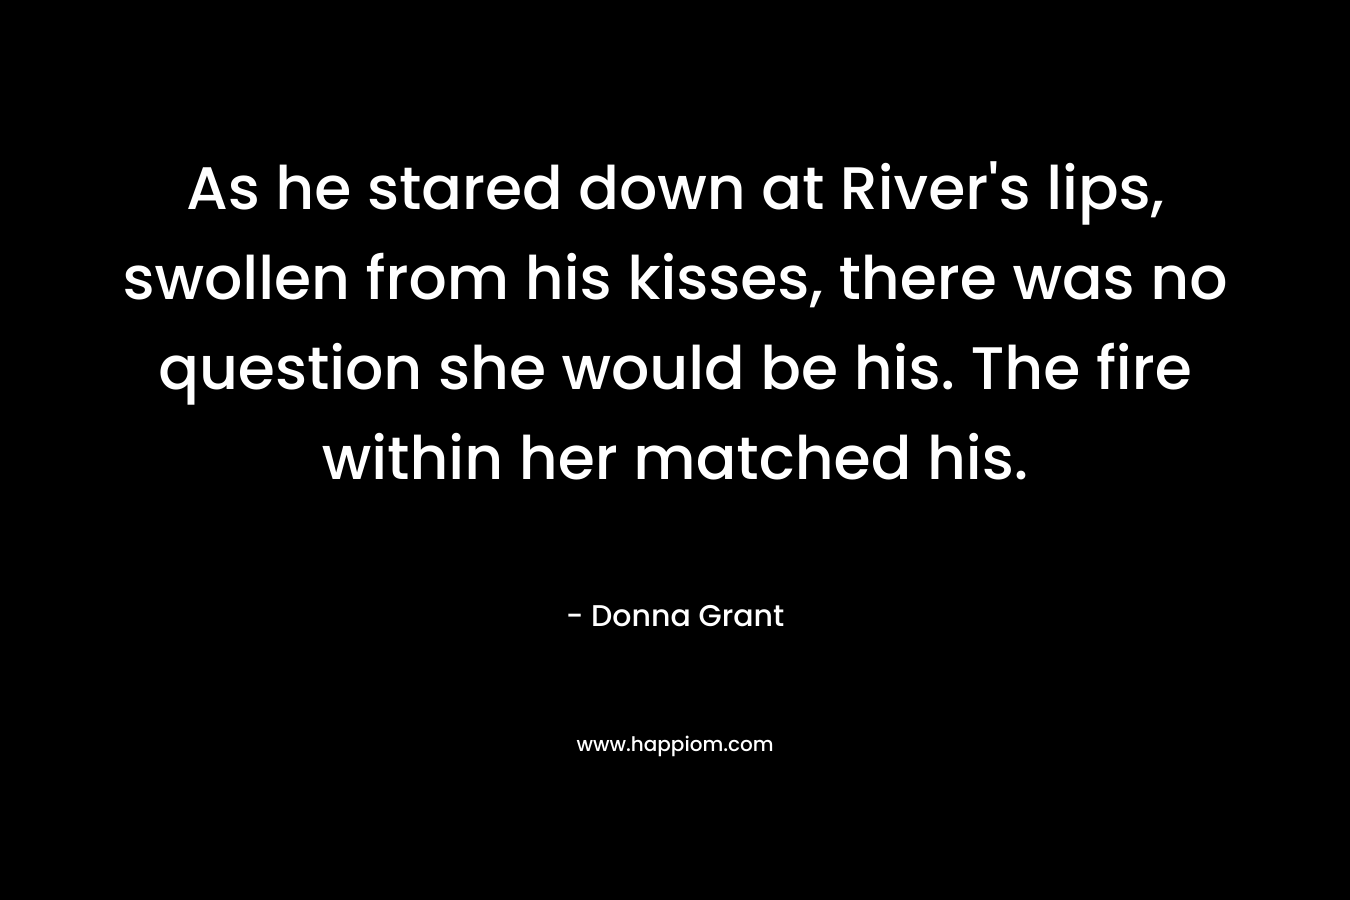 As he stared down at River’s lips, swollen from his kisses, there was no question she would be his. The fire within her matched his. – Donna Grant